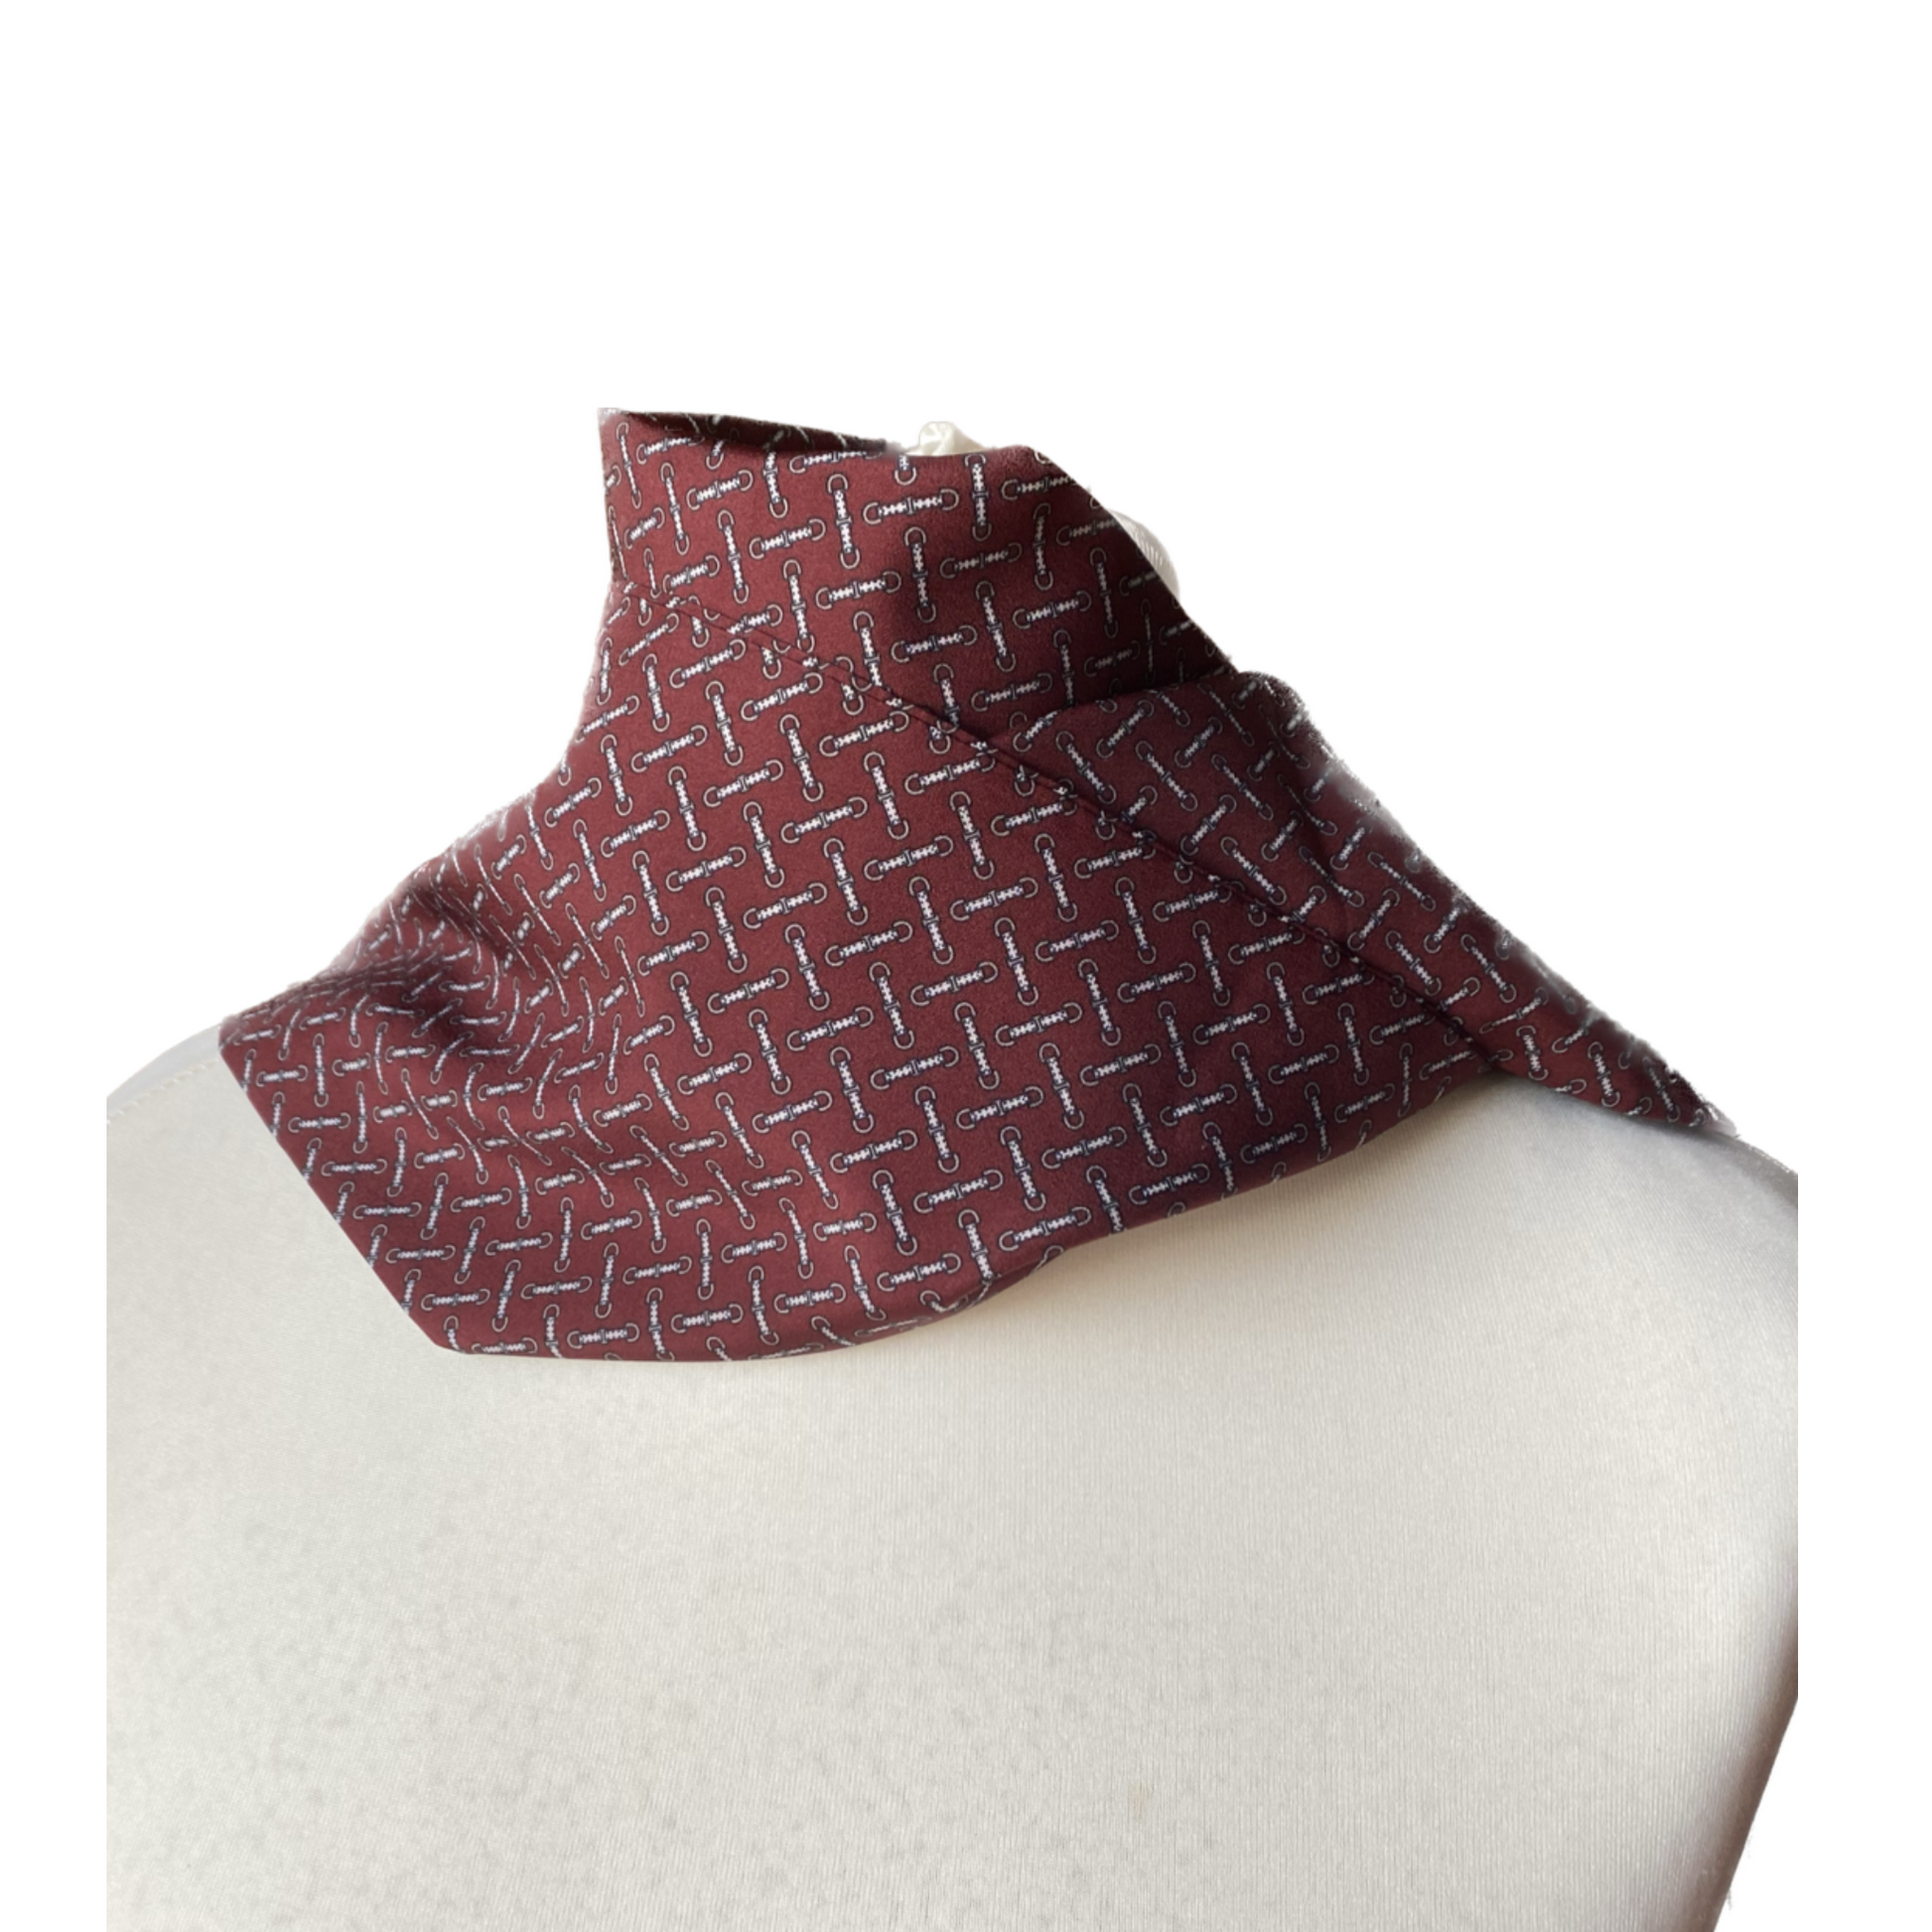 Multi-purpose Italian Sertosa scarf  - Wear it in multiple ways for different occasions.